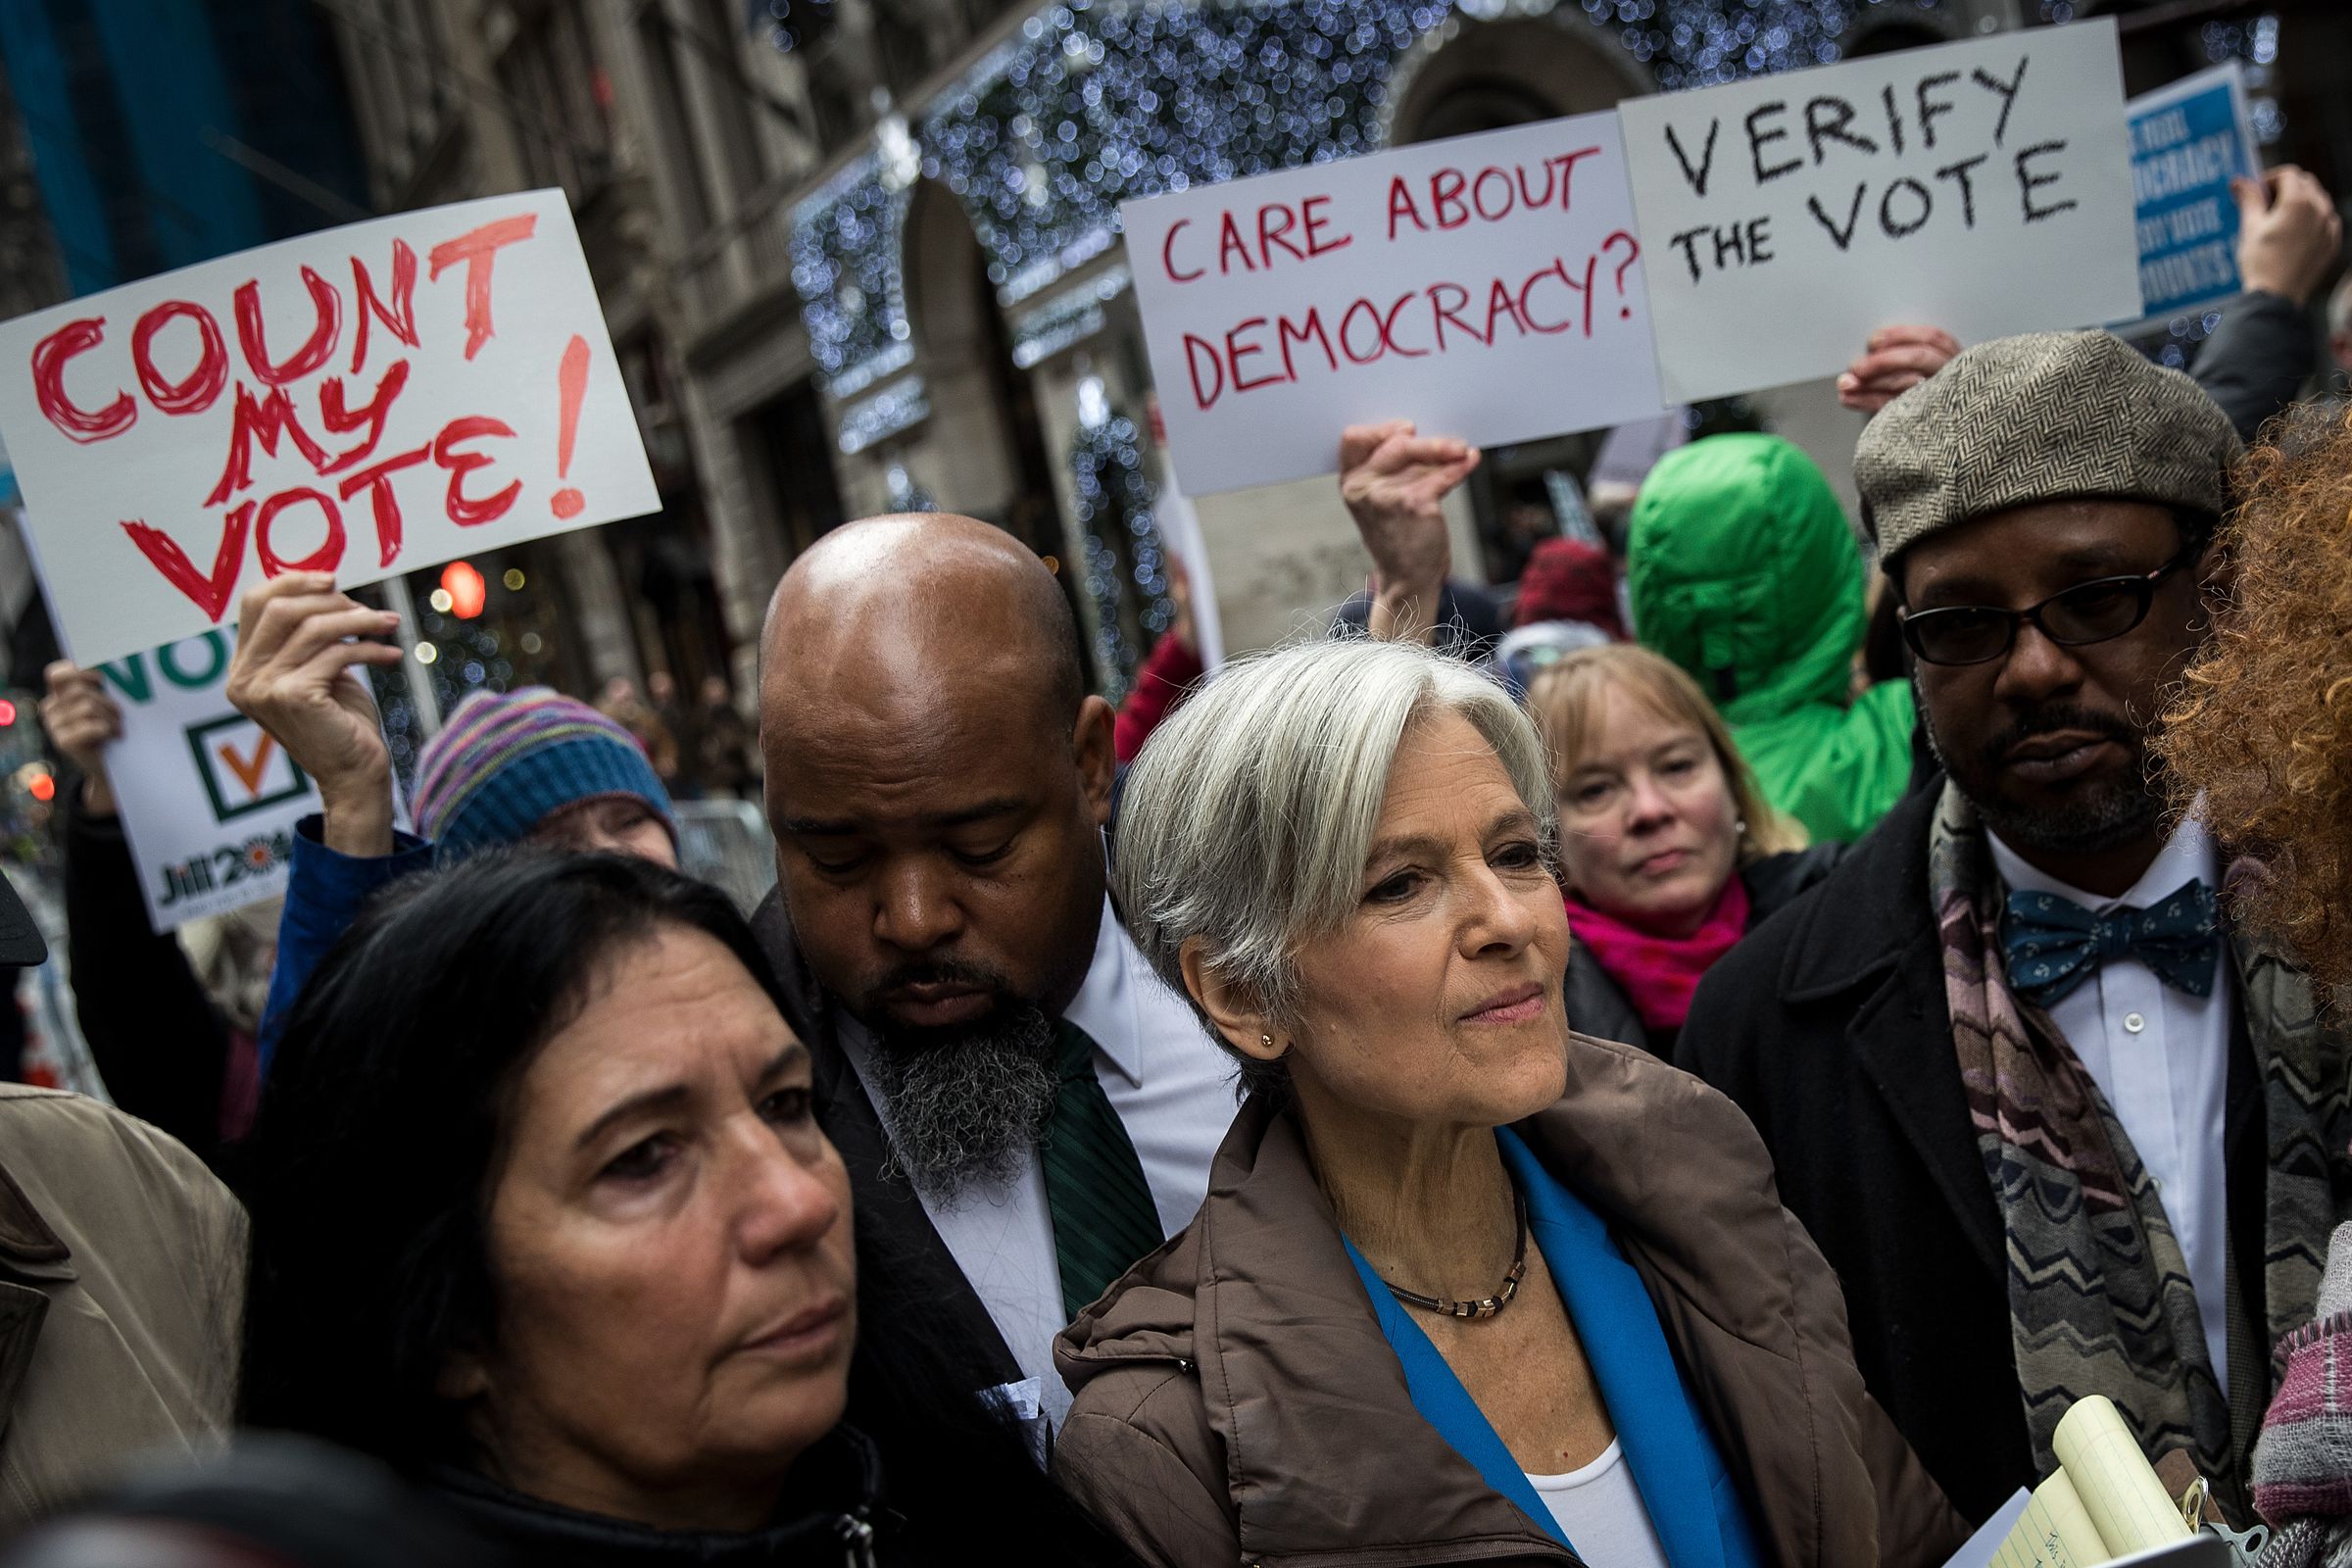 Green Party presidential candidate Jill Stein Discusses Recount Effort